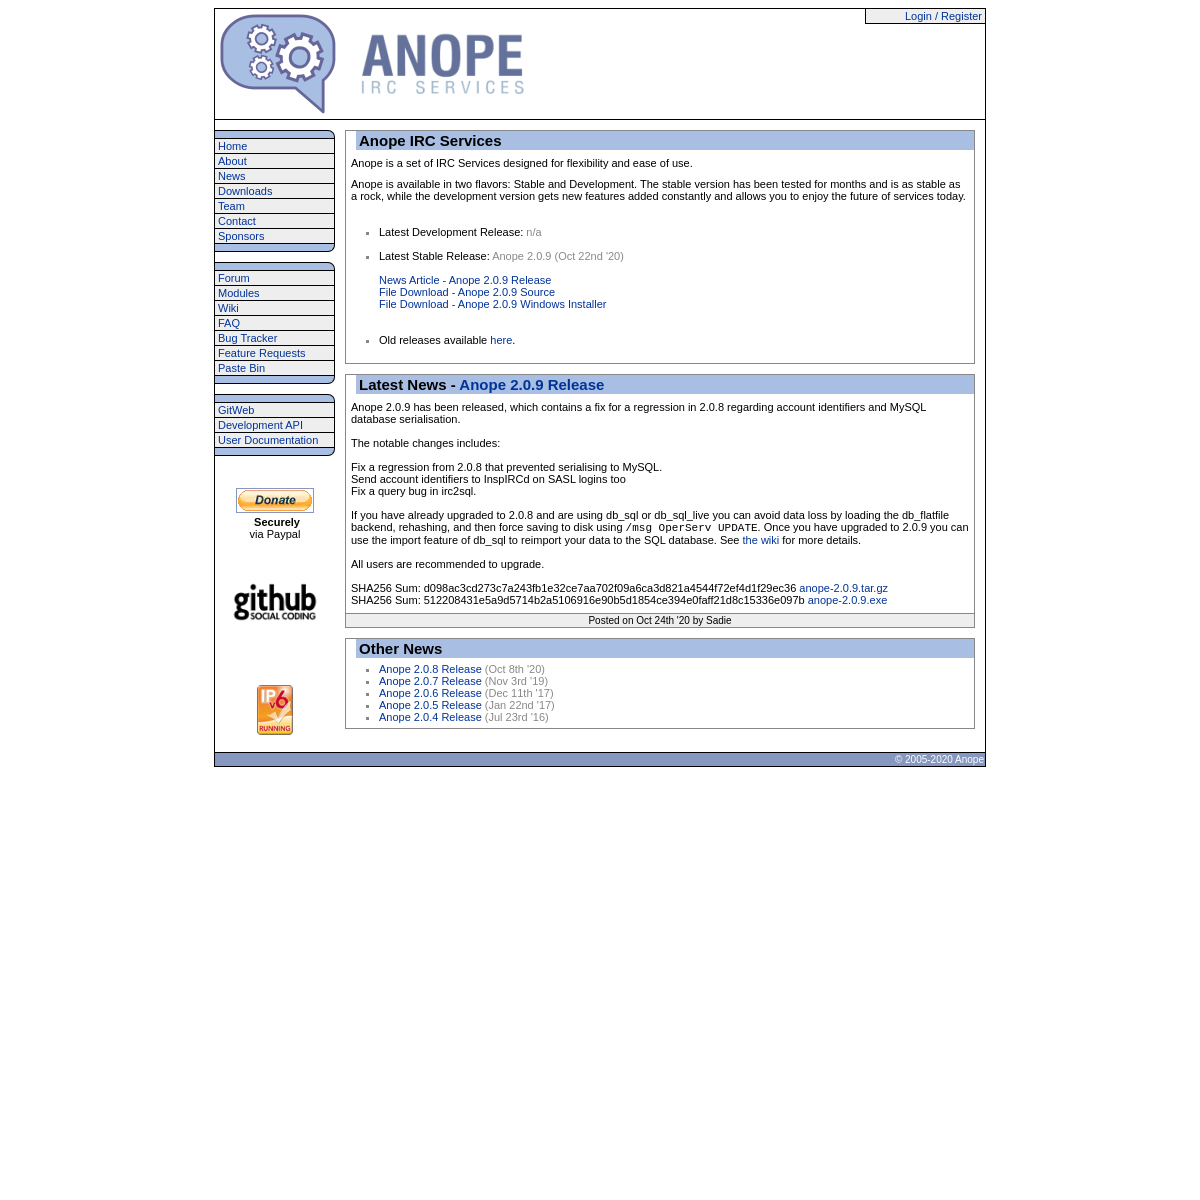 A complete backup of anope.org